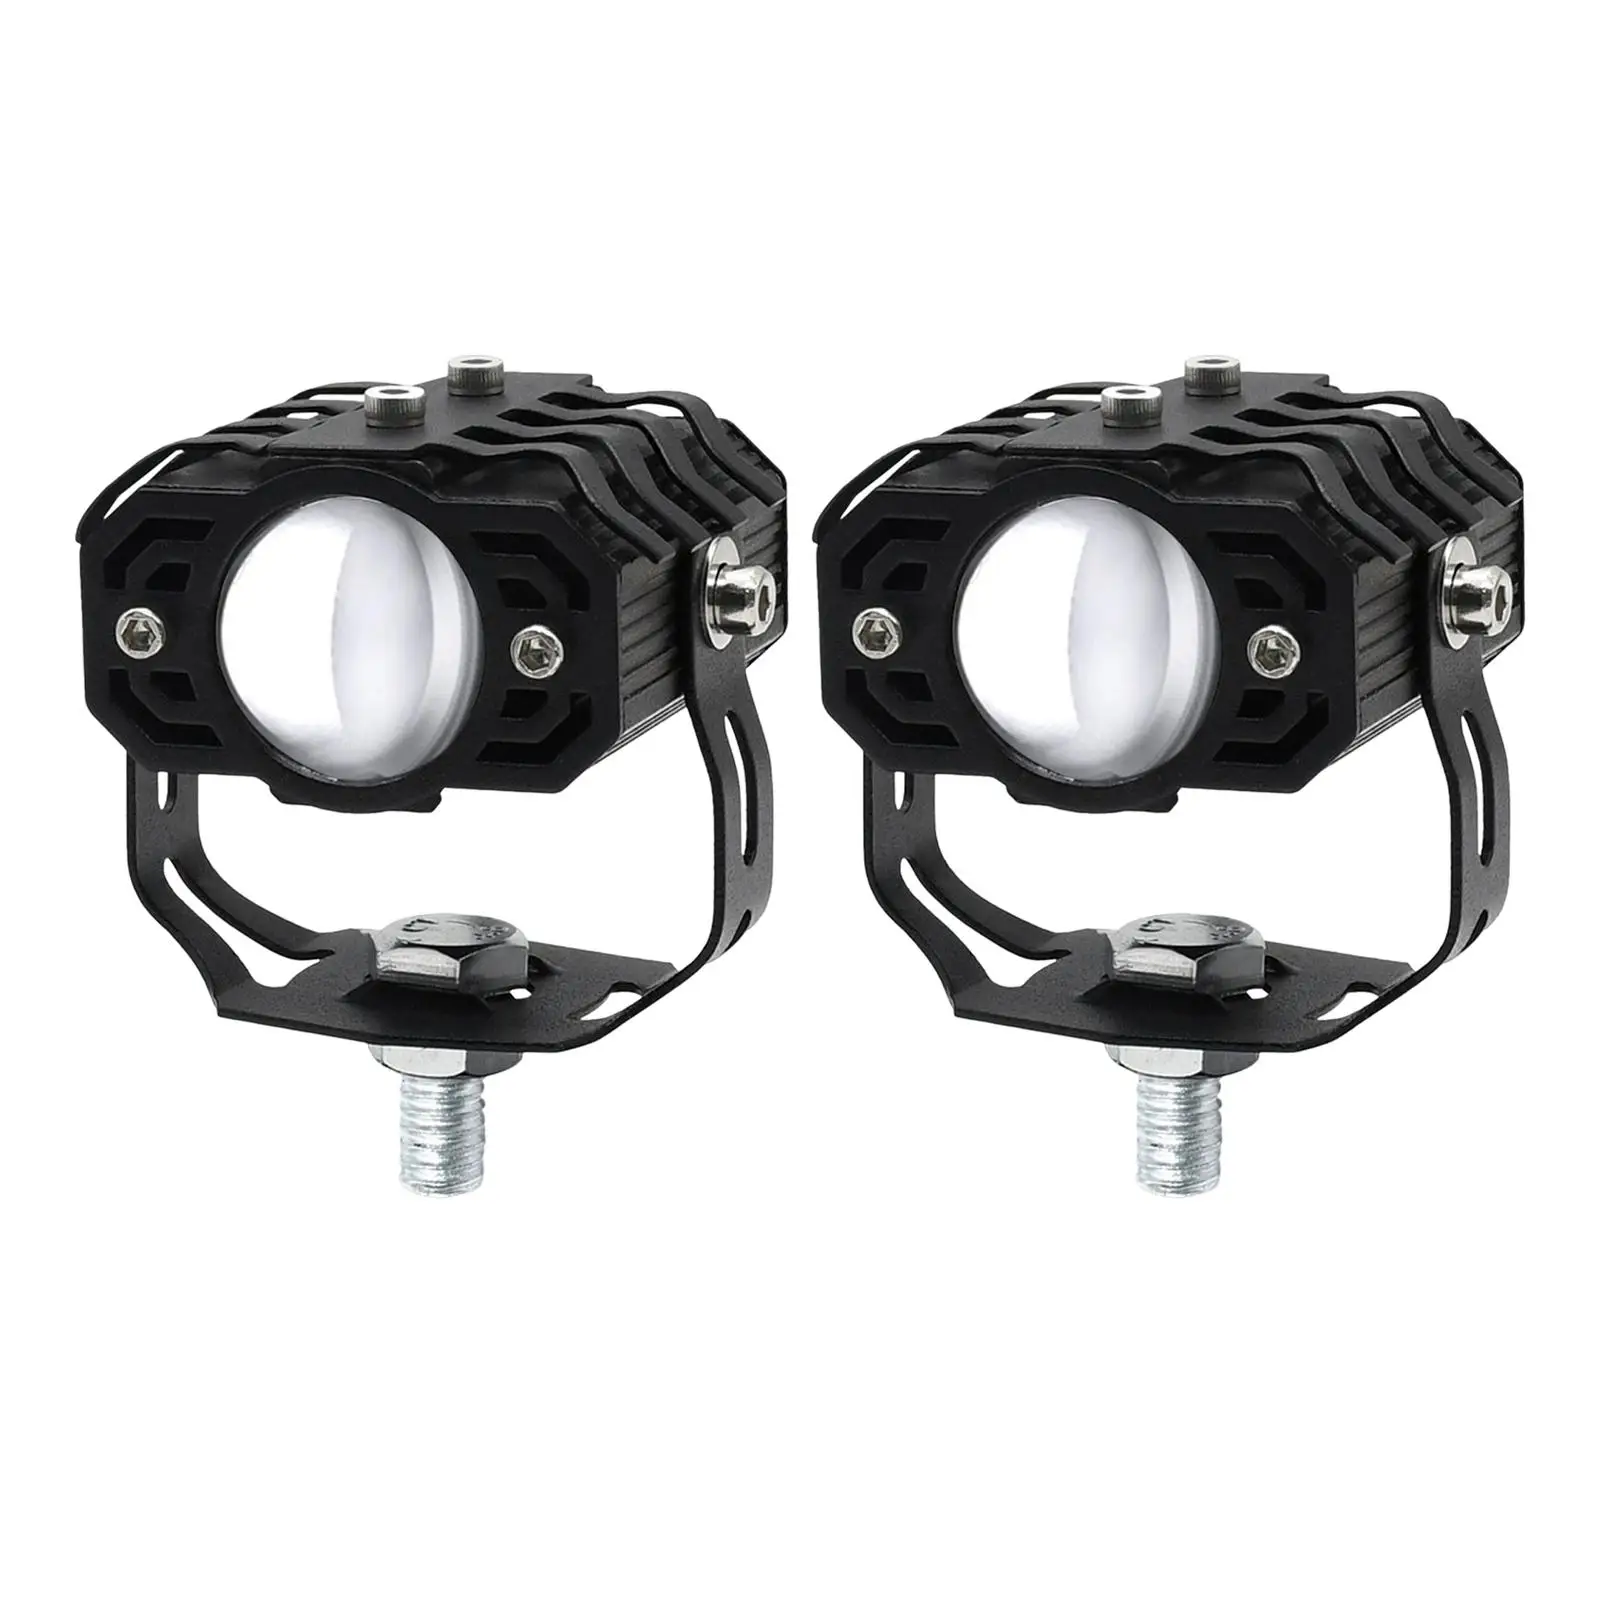 2x Motorcycle Auxiliary Driving Lights Mini Spotlights for Boat Car ATV